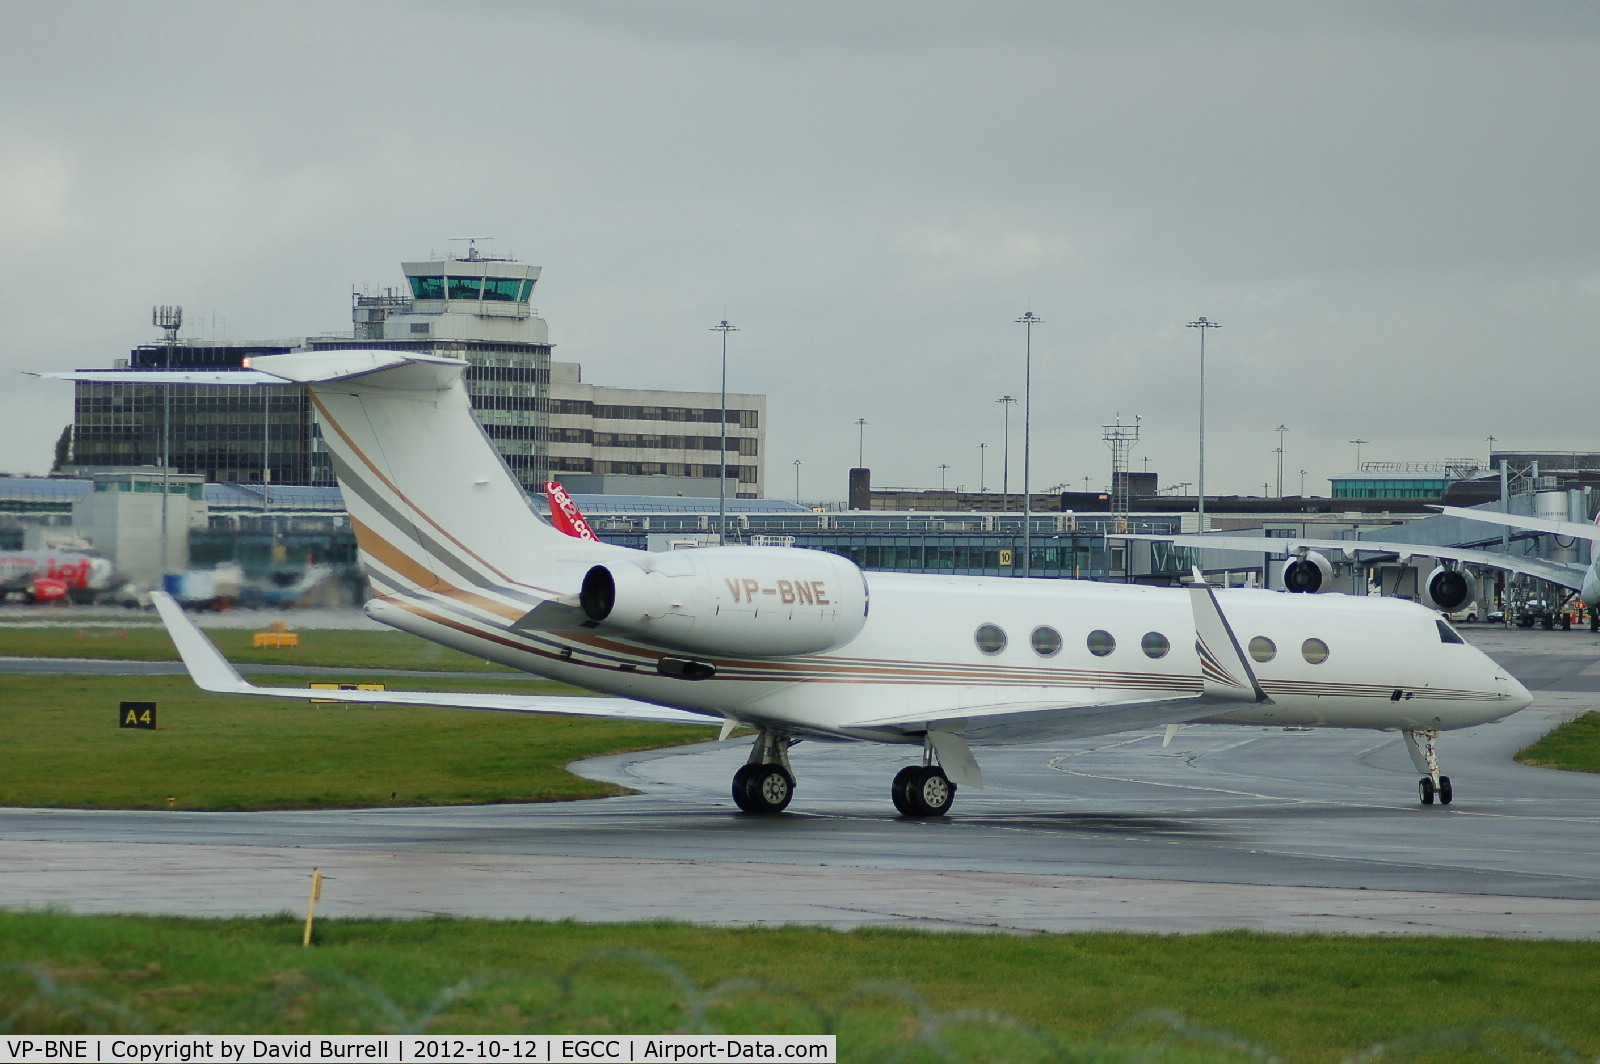 VP-BNE, 2005 Gulfstream Aerospace GV-SP (G550) C/N 5051, Jet Aviation Business Jets Gulfstream G550 taxiing at Manchester Airport.